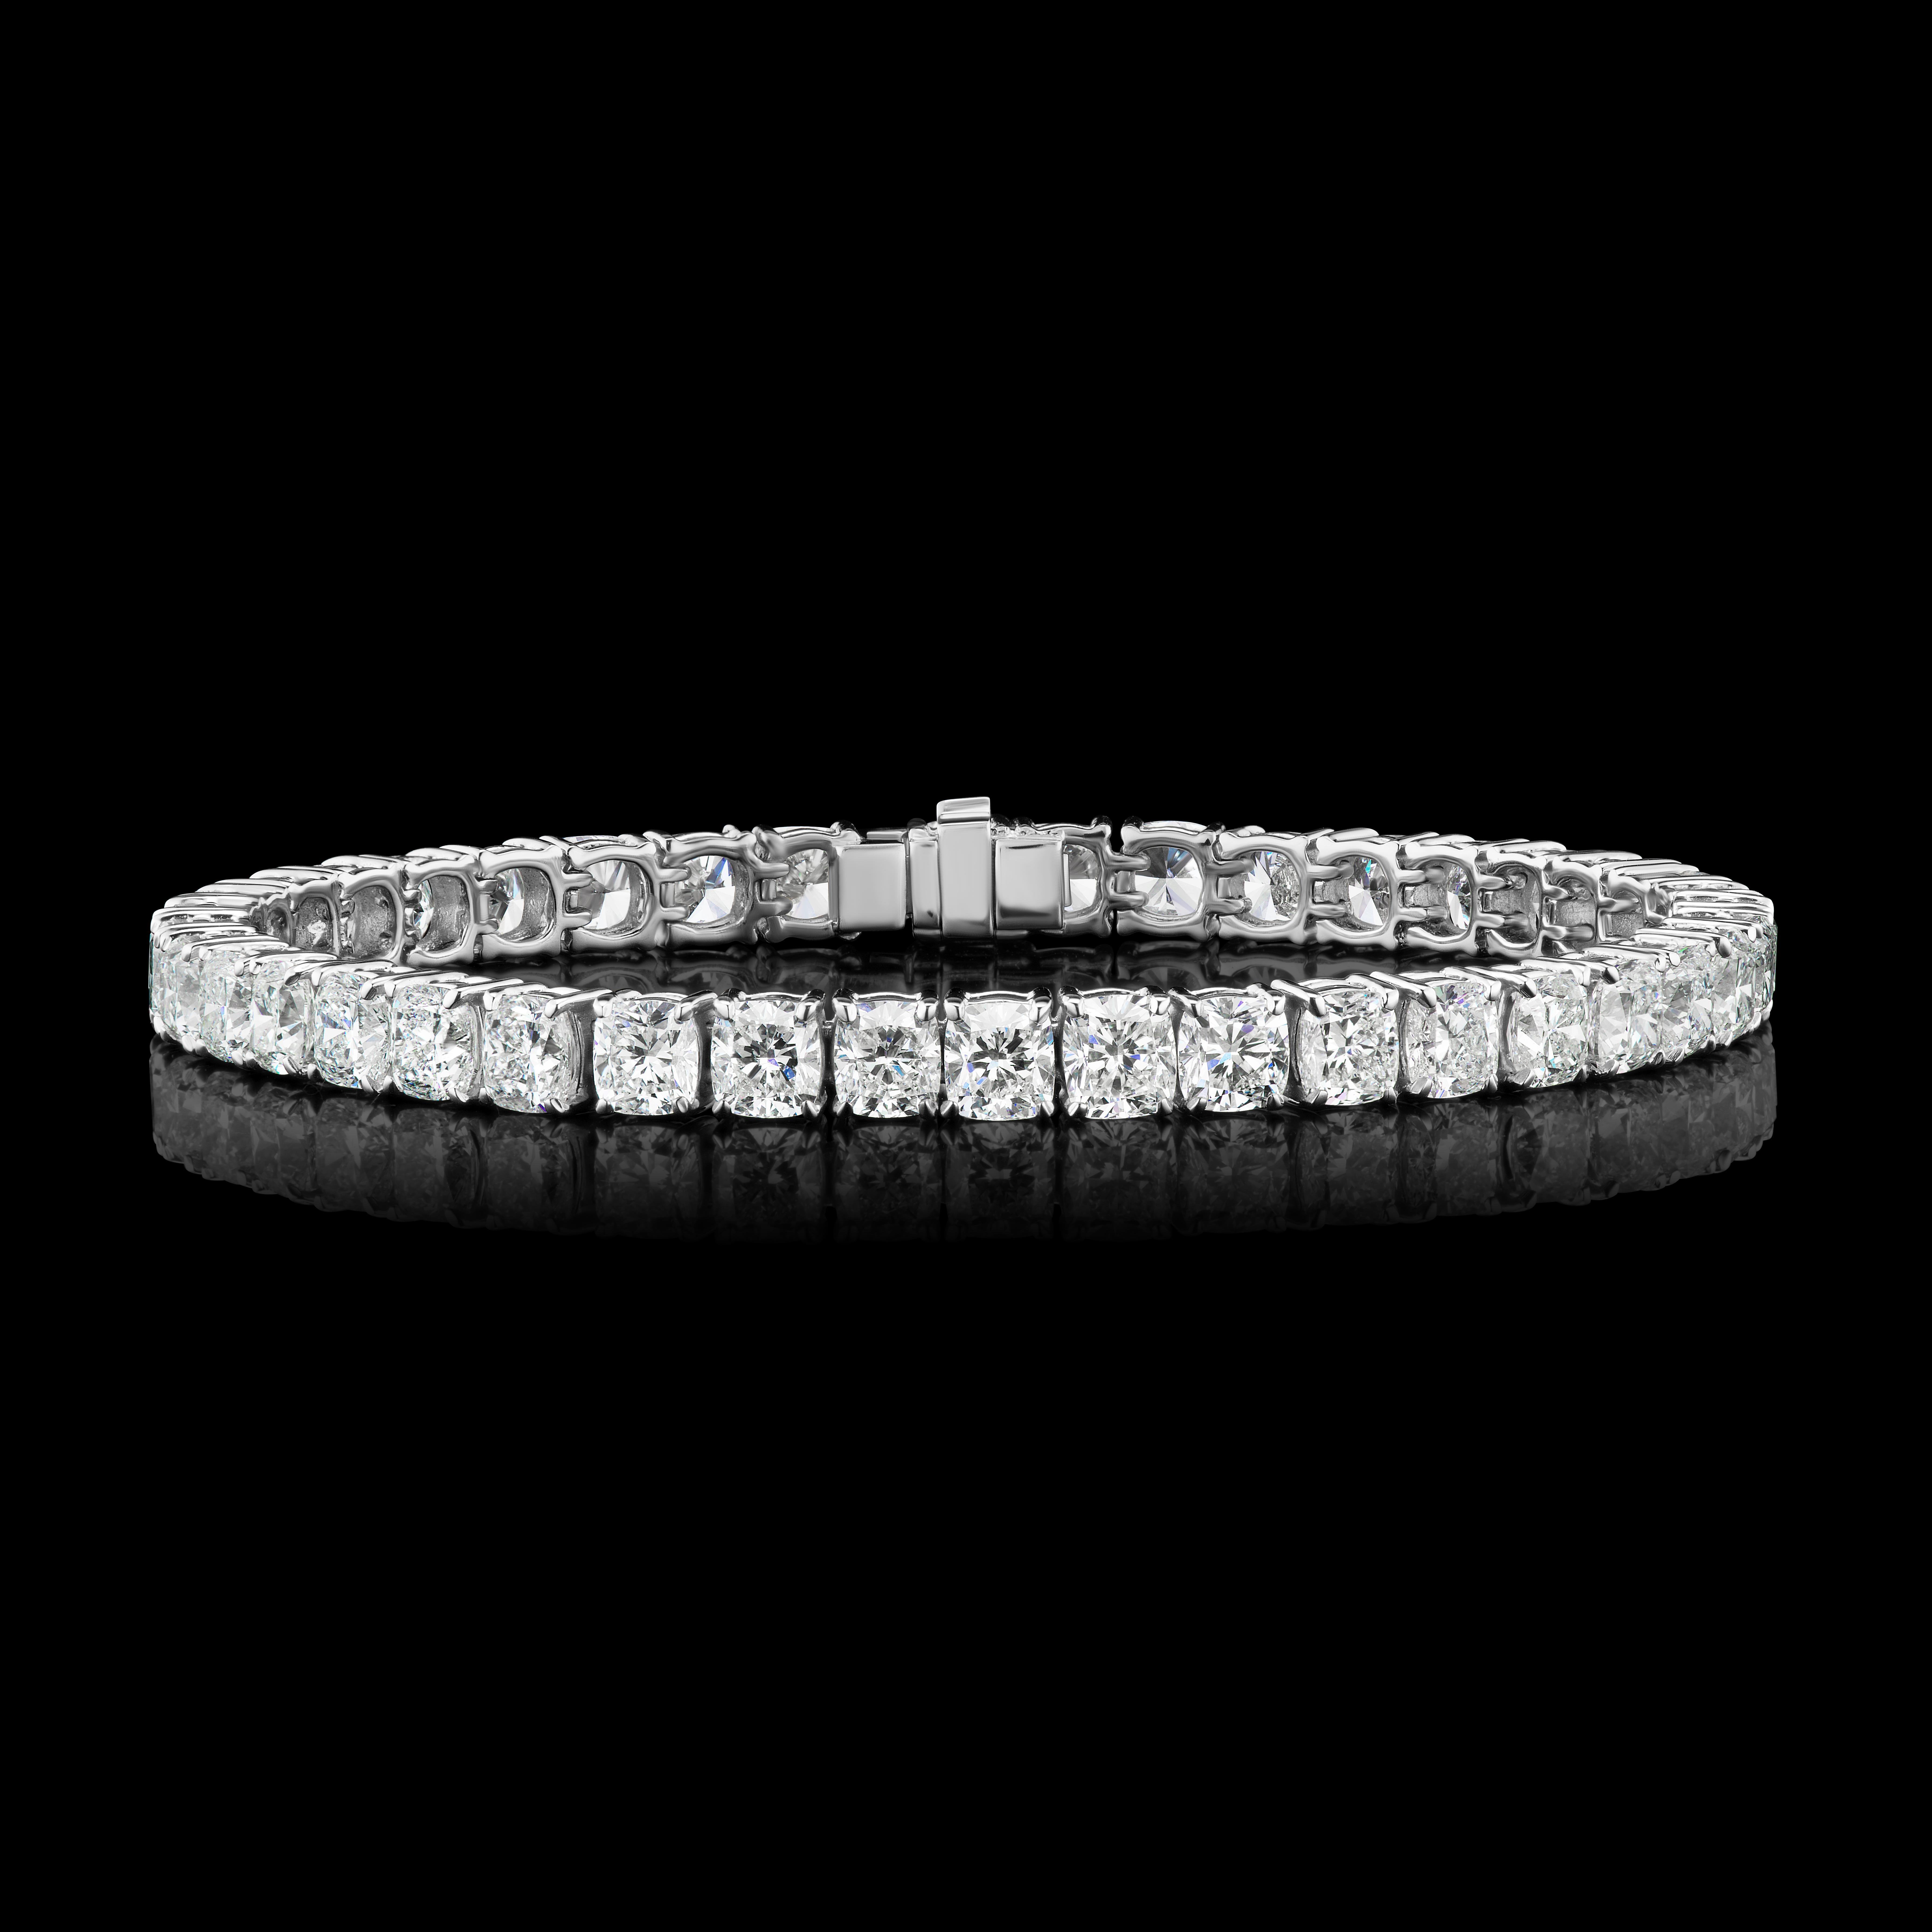 Classic Cushion Diamond Tennis Bracelet in 18K White Gold ( 19.97 ct. tw. )

This diamond bracelet is made using Cushion diamonds which are elegantly set in a straight line, which gives it a very elegant look. Made with matching 40 Cushion diamonds